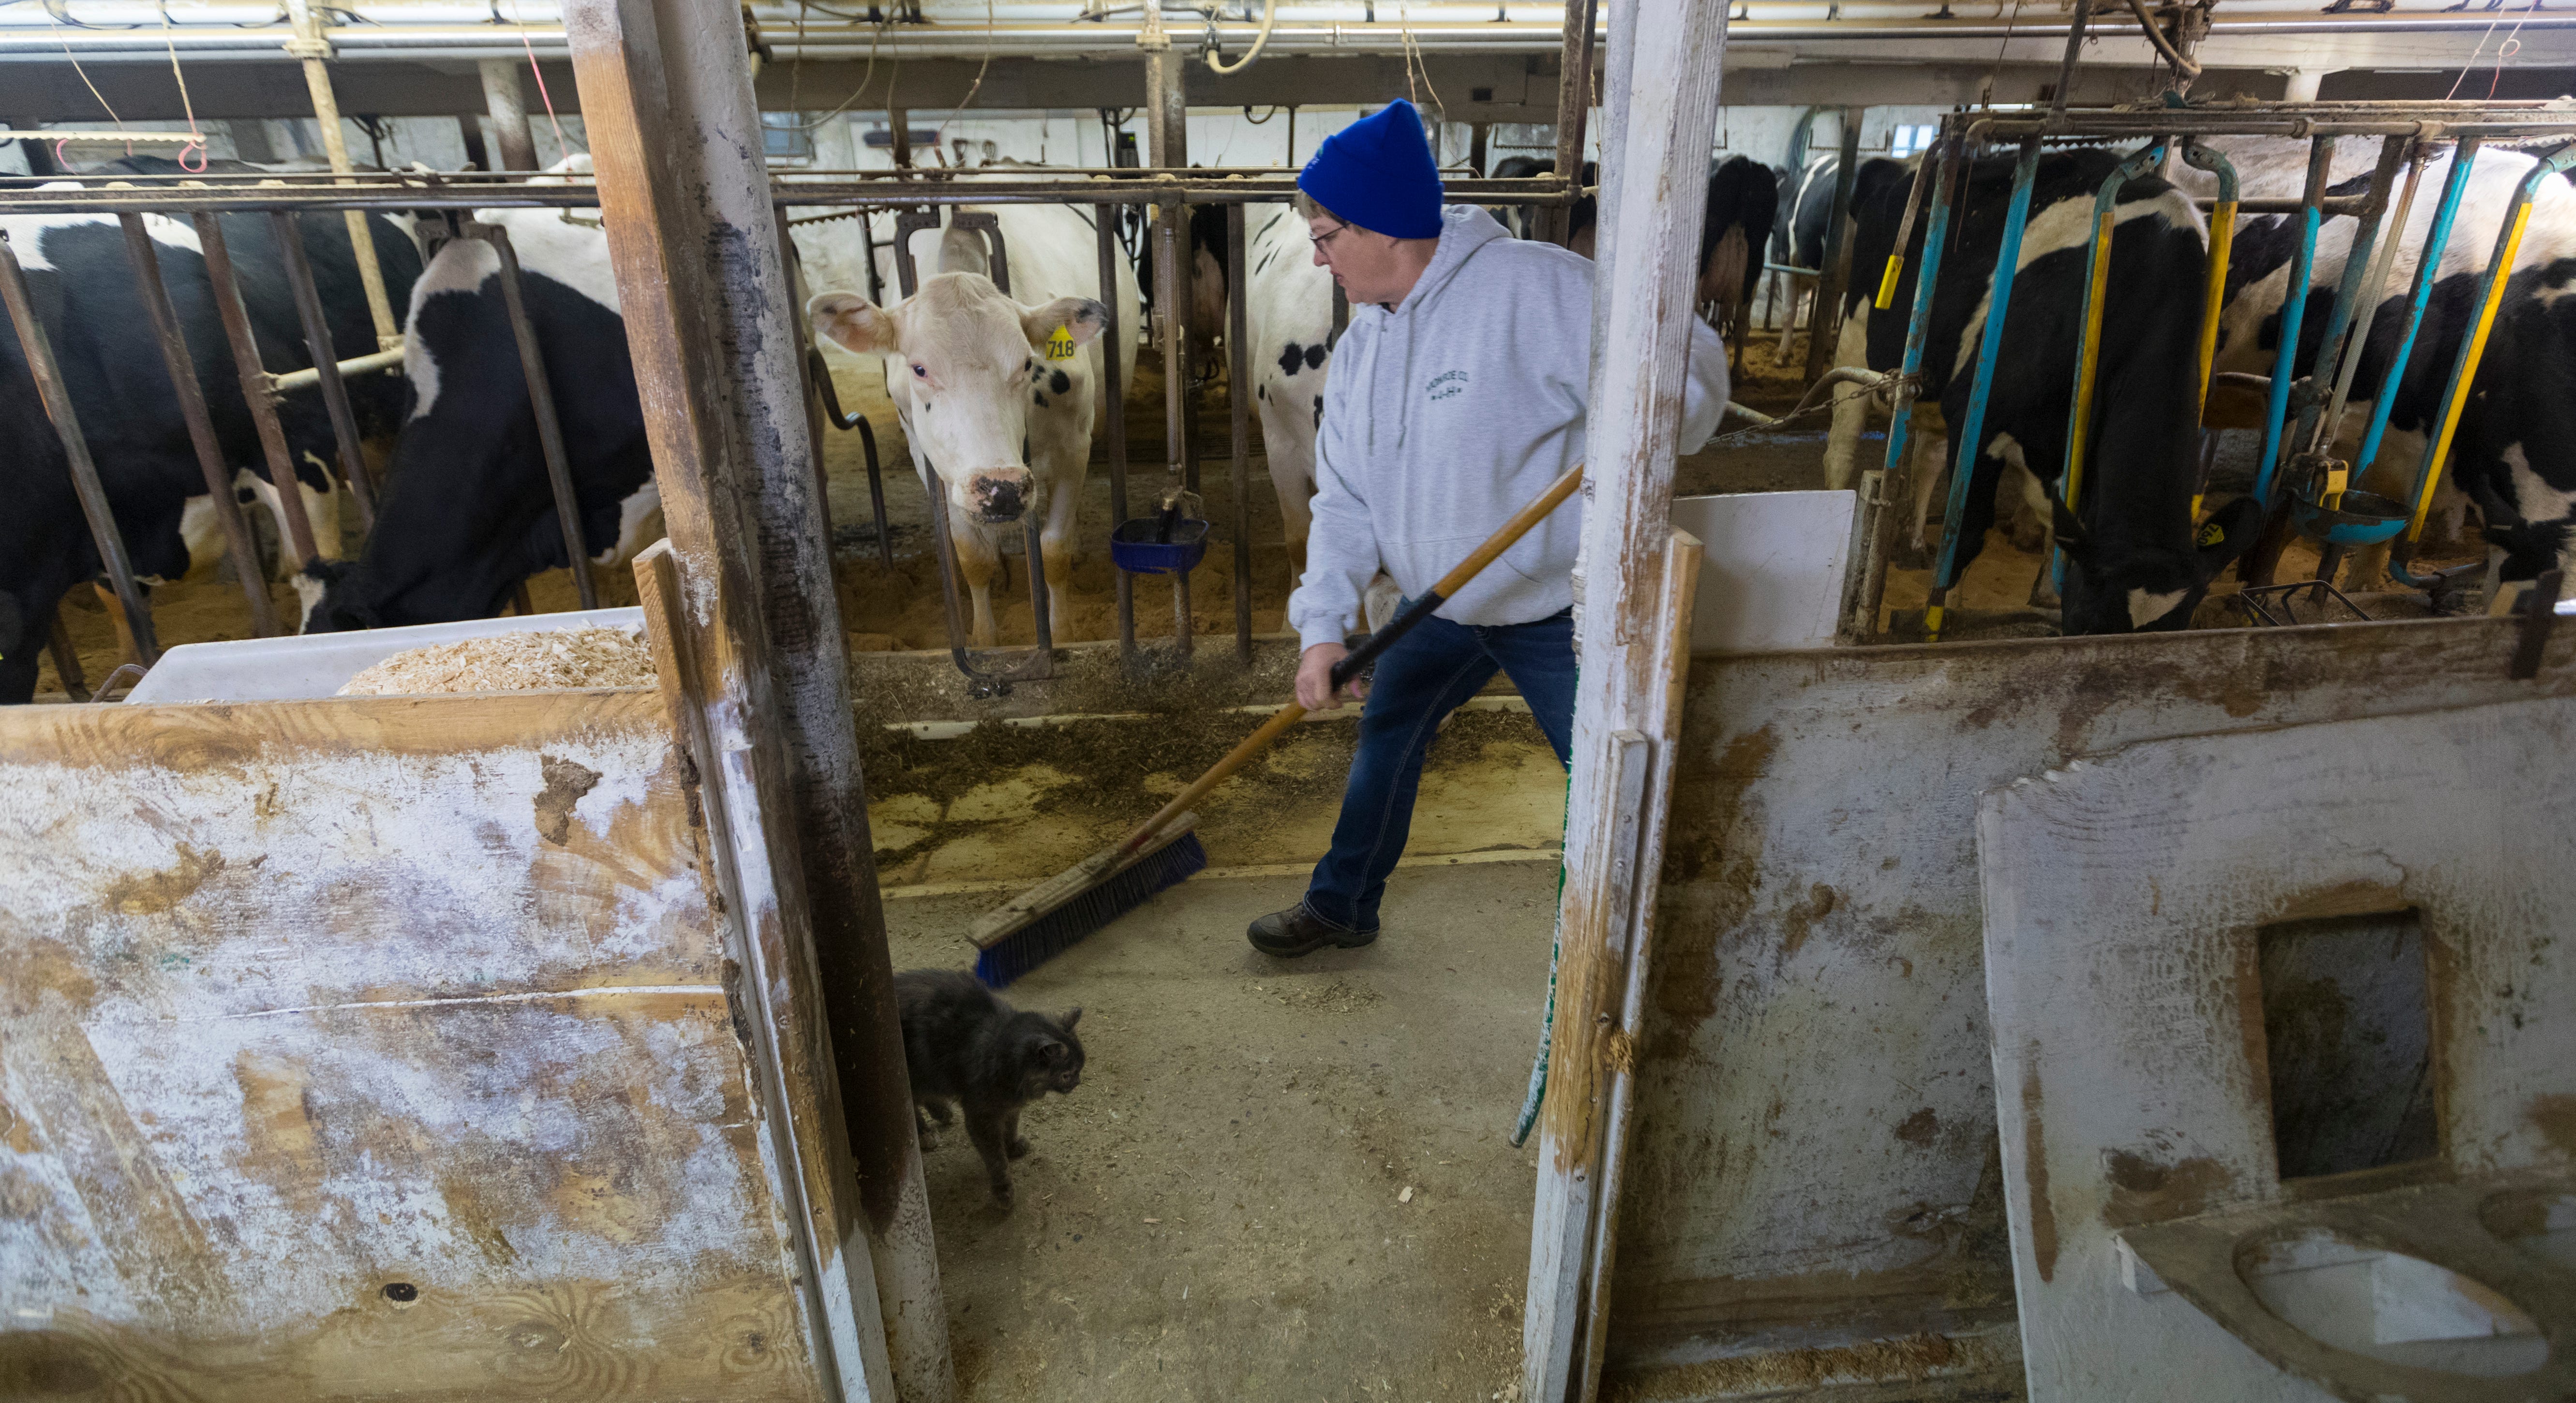 Annette Trescher sweeps around a barn cat while doing morning chores on her family's farm in Cashton. They currently milk about 80 cows twice a day.